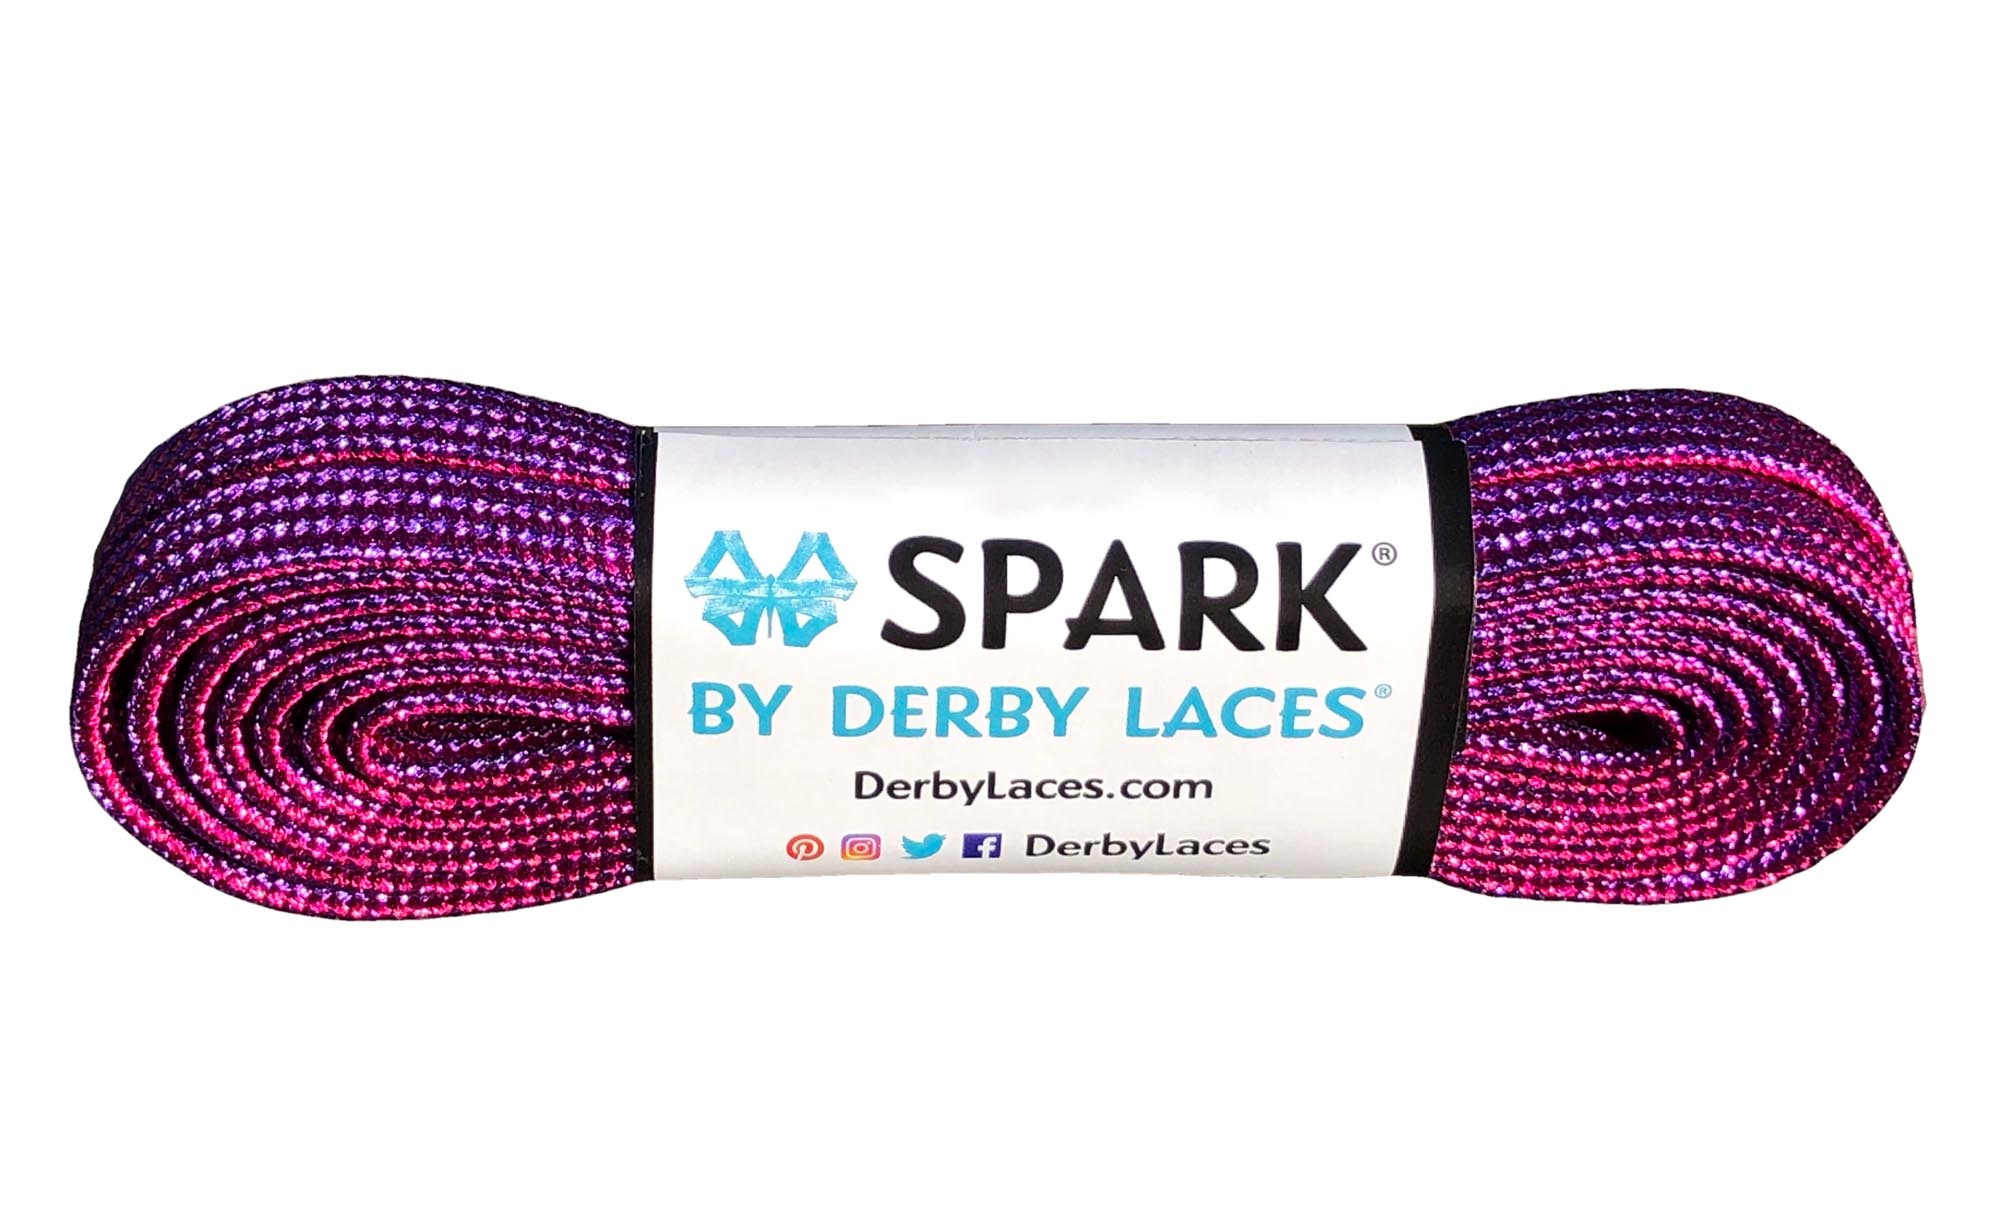 36 45 5... Silver SPARK by Derby Laces Metallic Roller Derby Skate Lace in 27